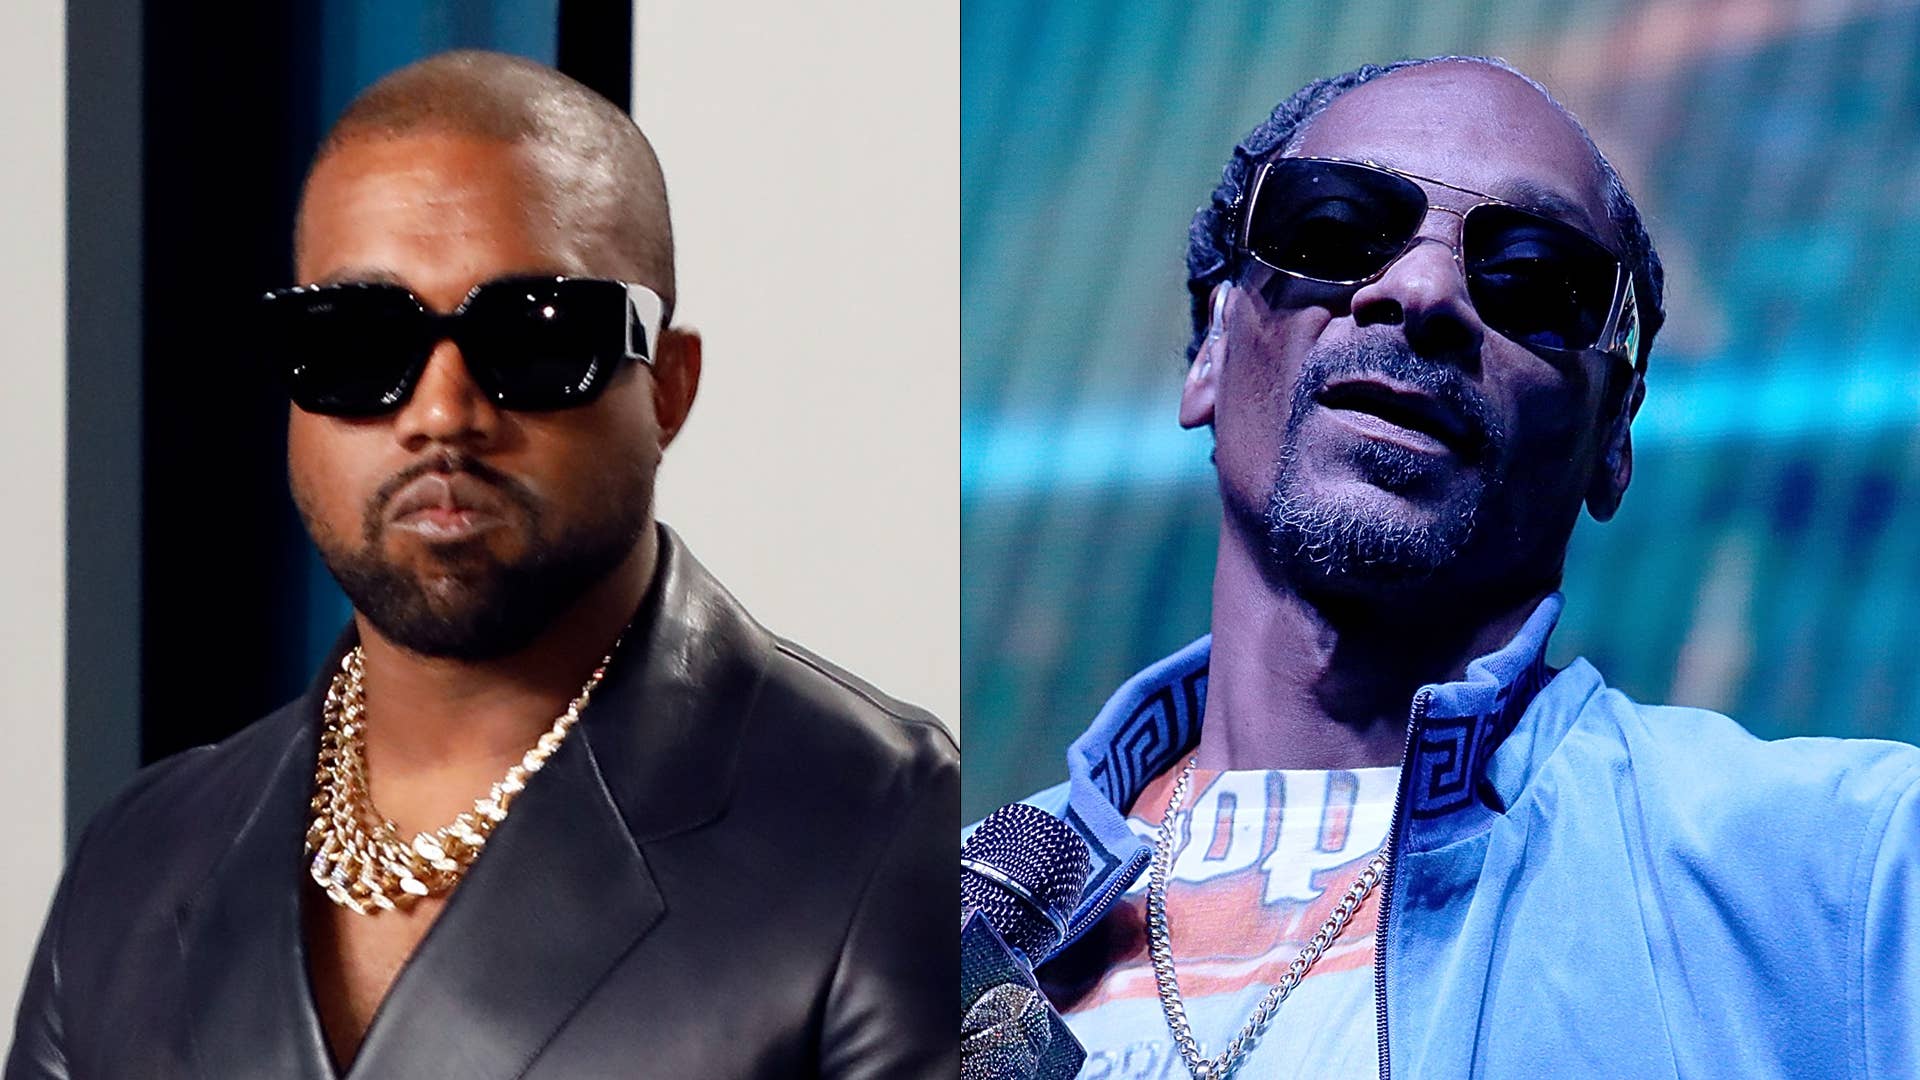 Kanye West and Snoop Dogg DSPs music removal